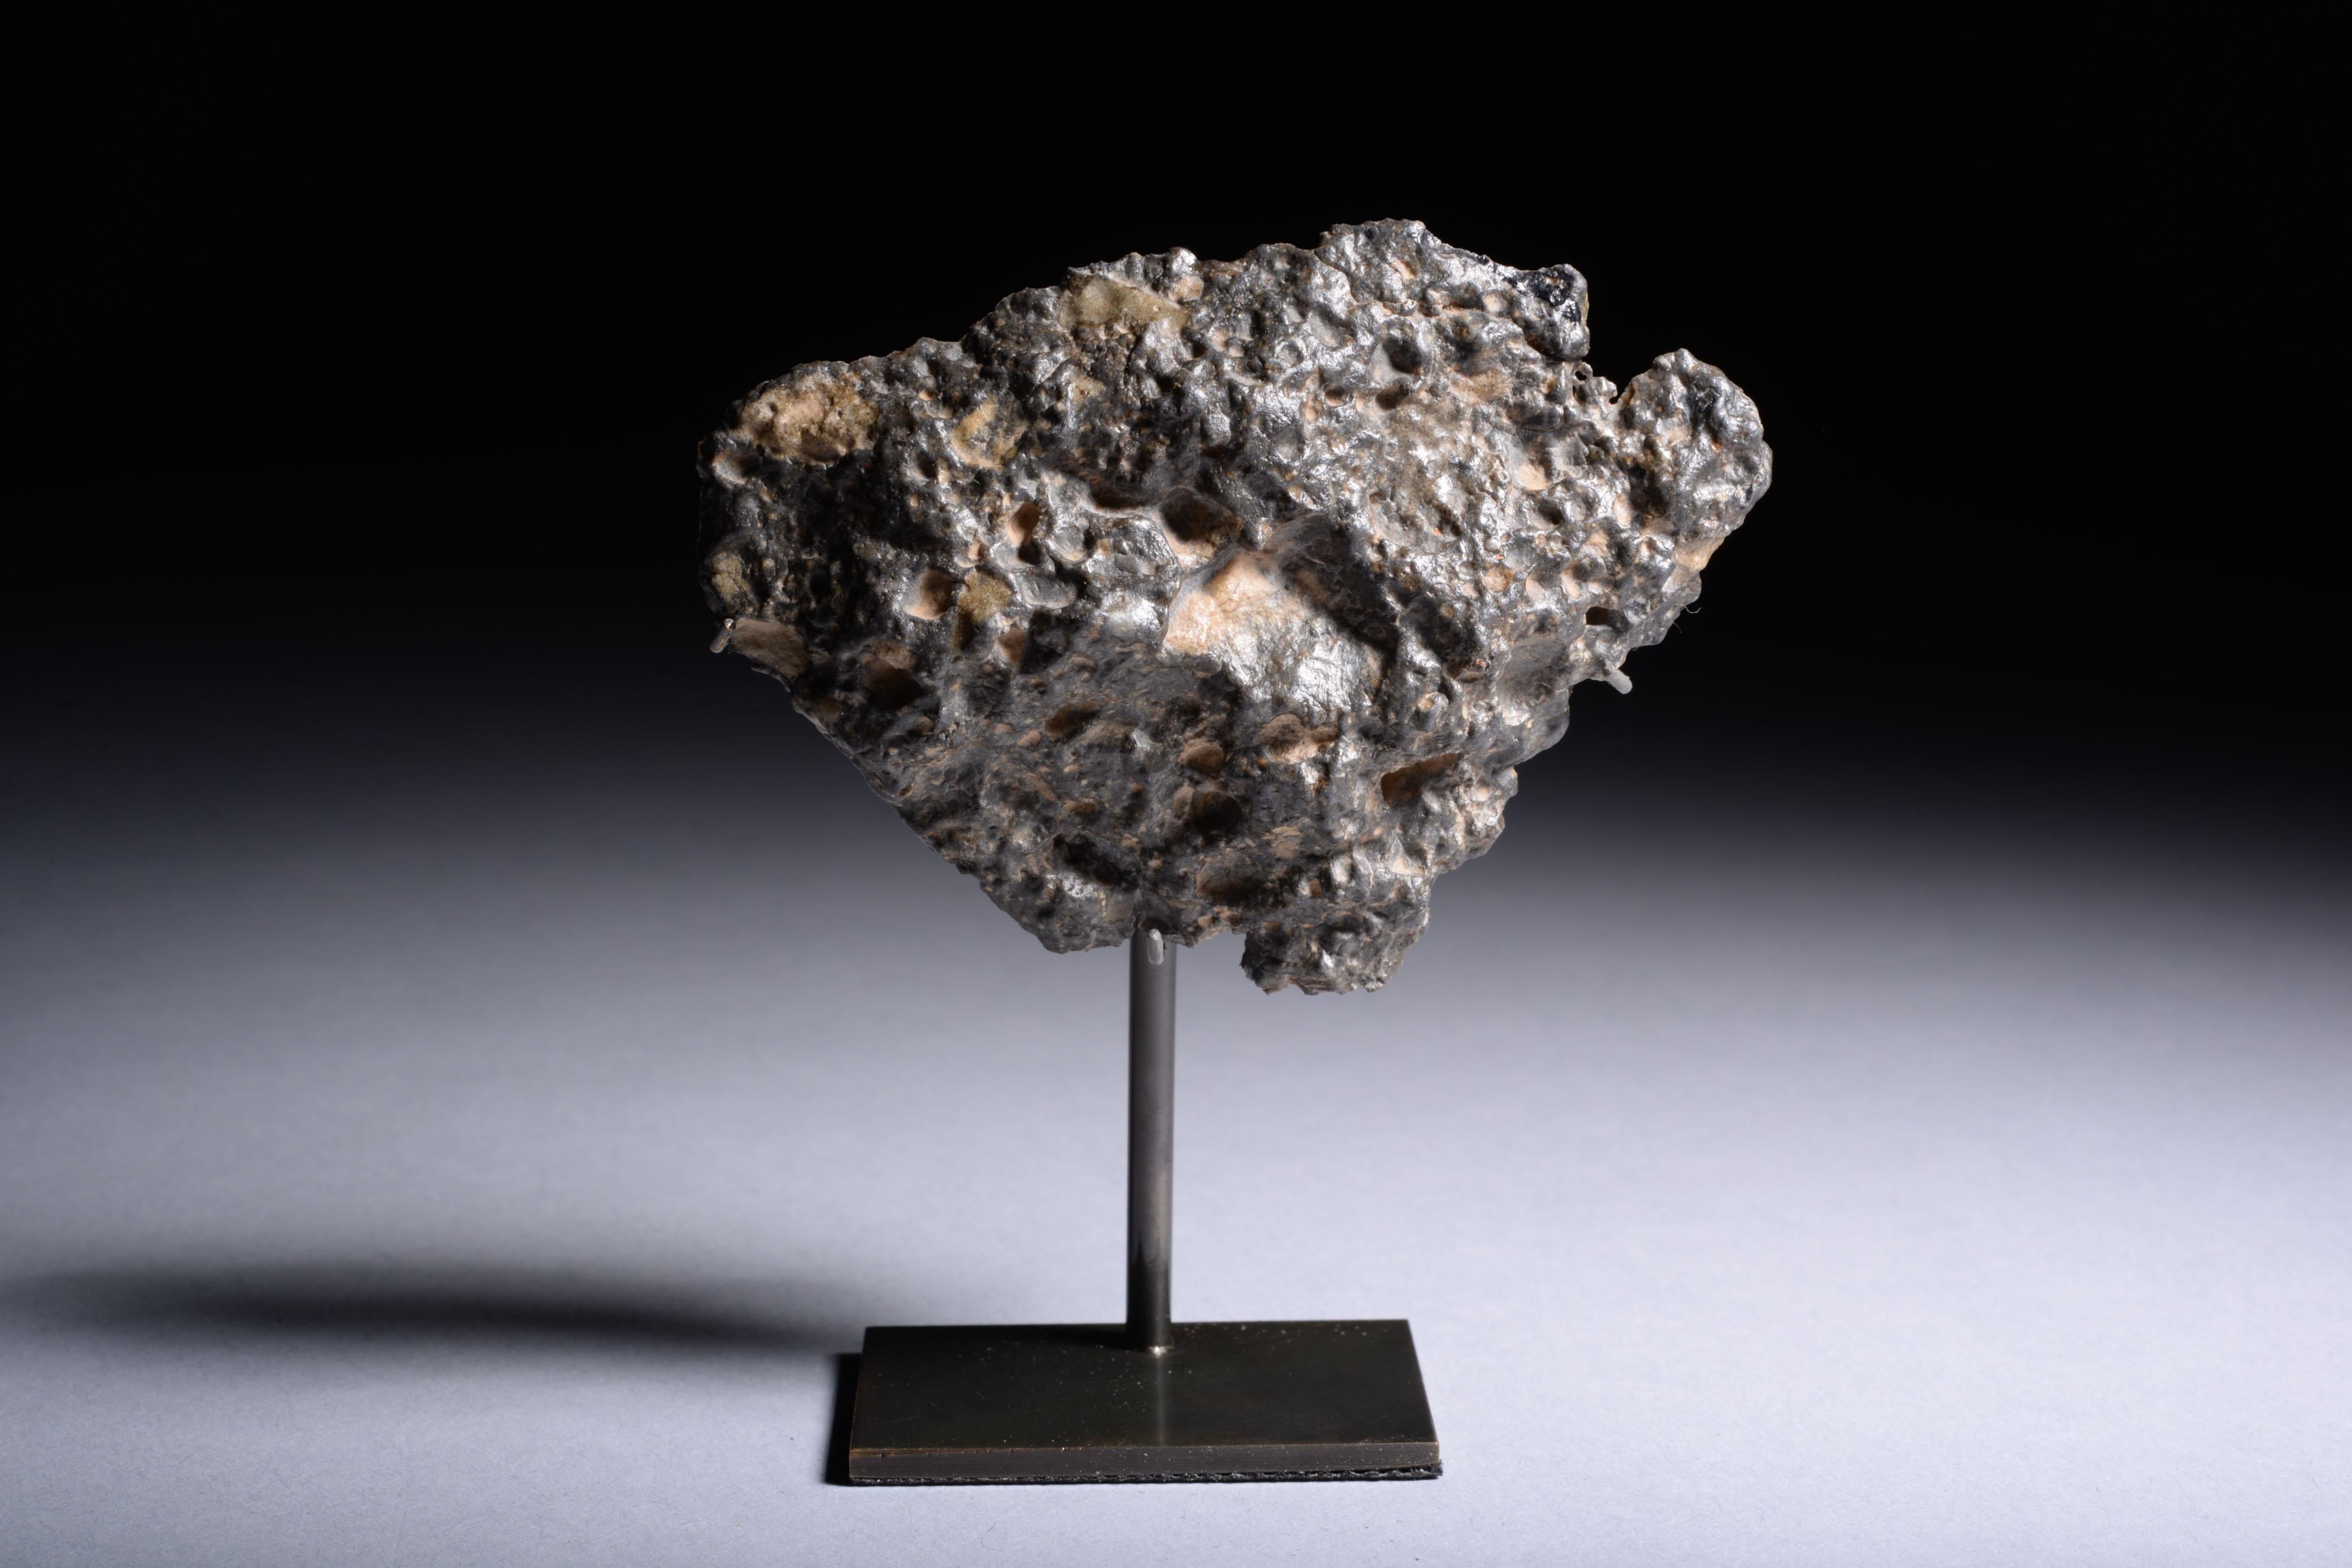 A beautiful fragment from a lunar meteorite, among the rarest of all geological finds. This specimen belongs to NWA 11303, a feldspathic regolith breccia which formed when the shock wave caused by an asteroid impact turned the fine-grained soil (or